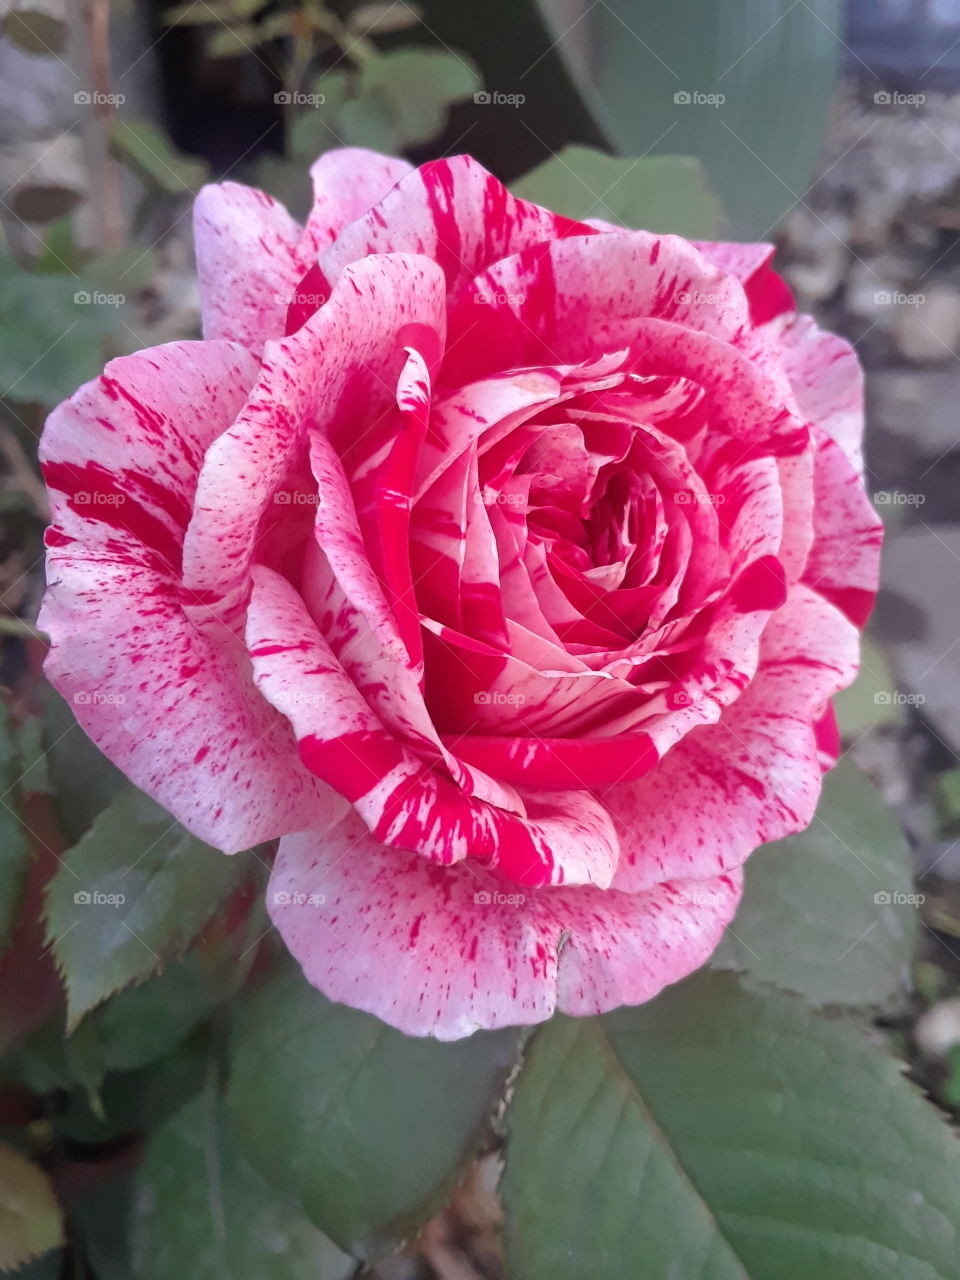 Sent a licous Red and pink variegated rose